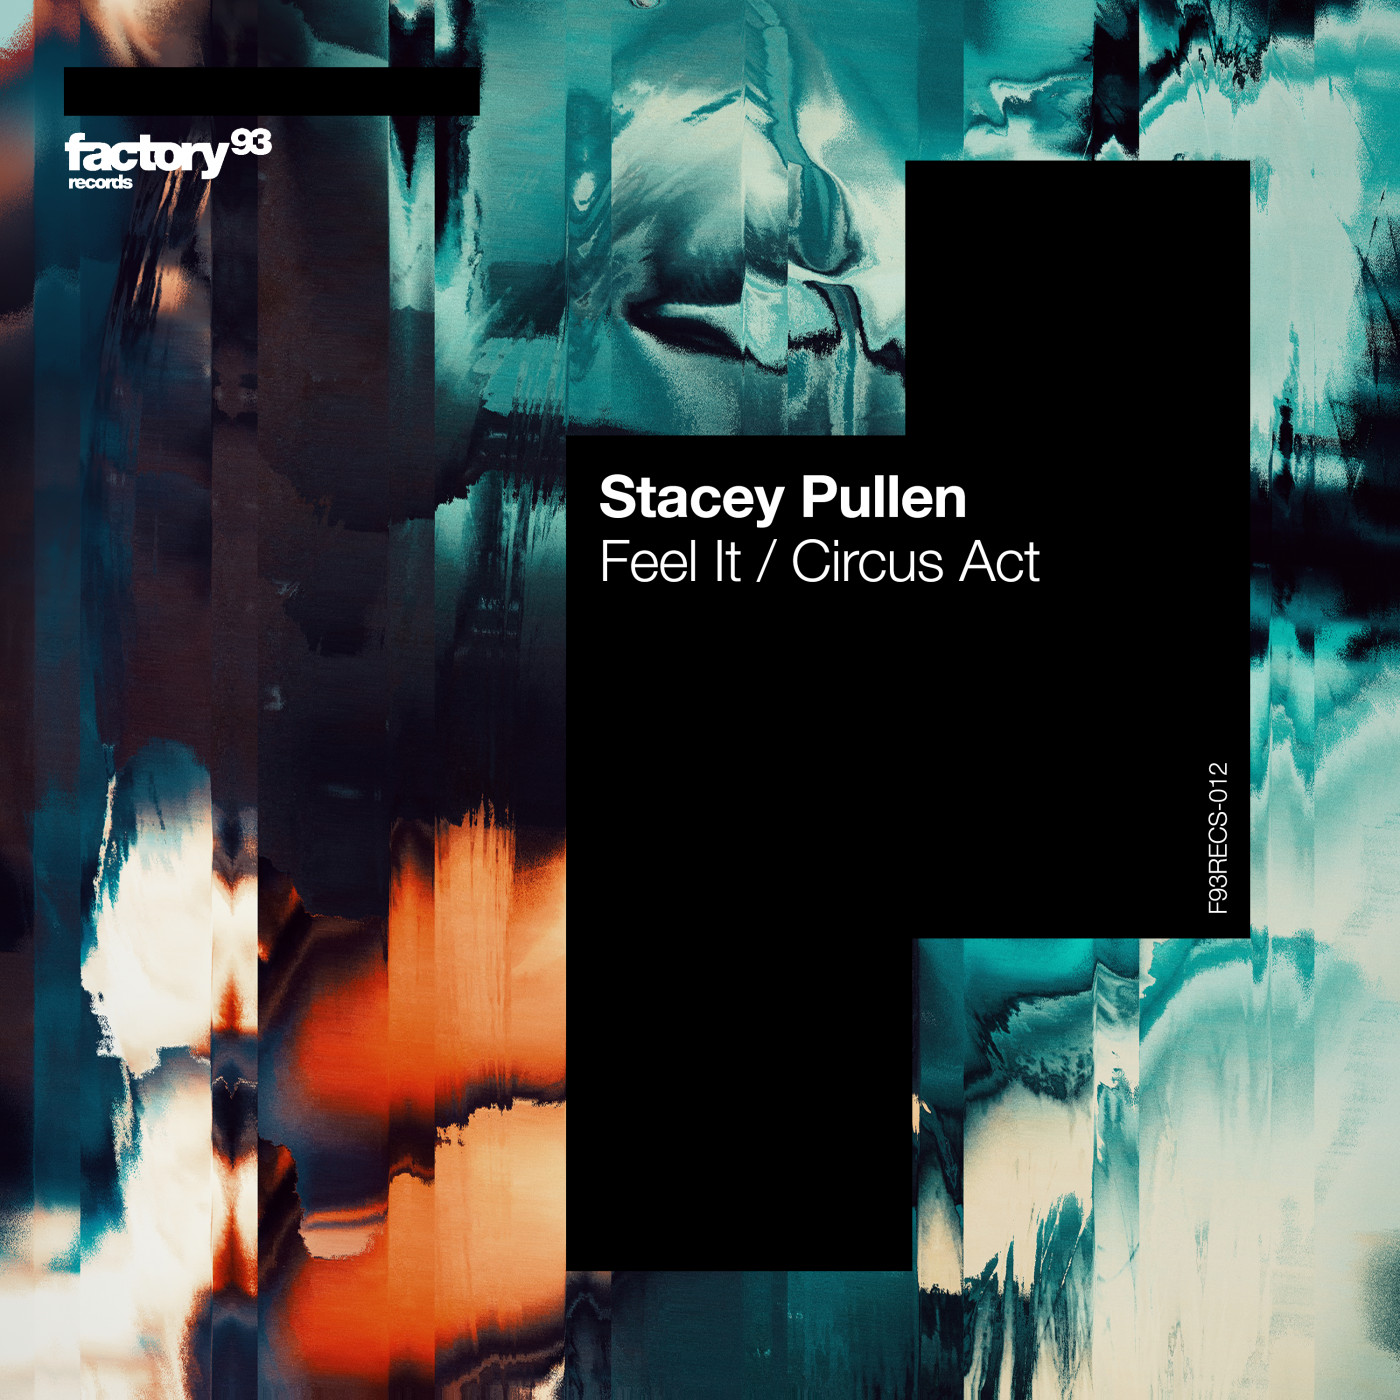 Stacey Pullen – Feel It / Circus Act